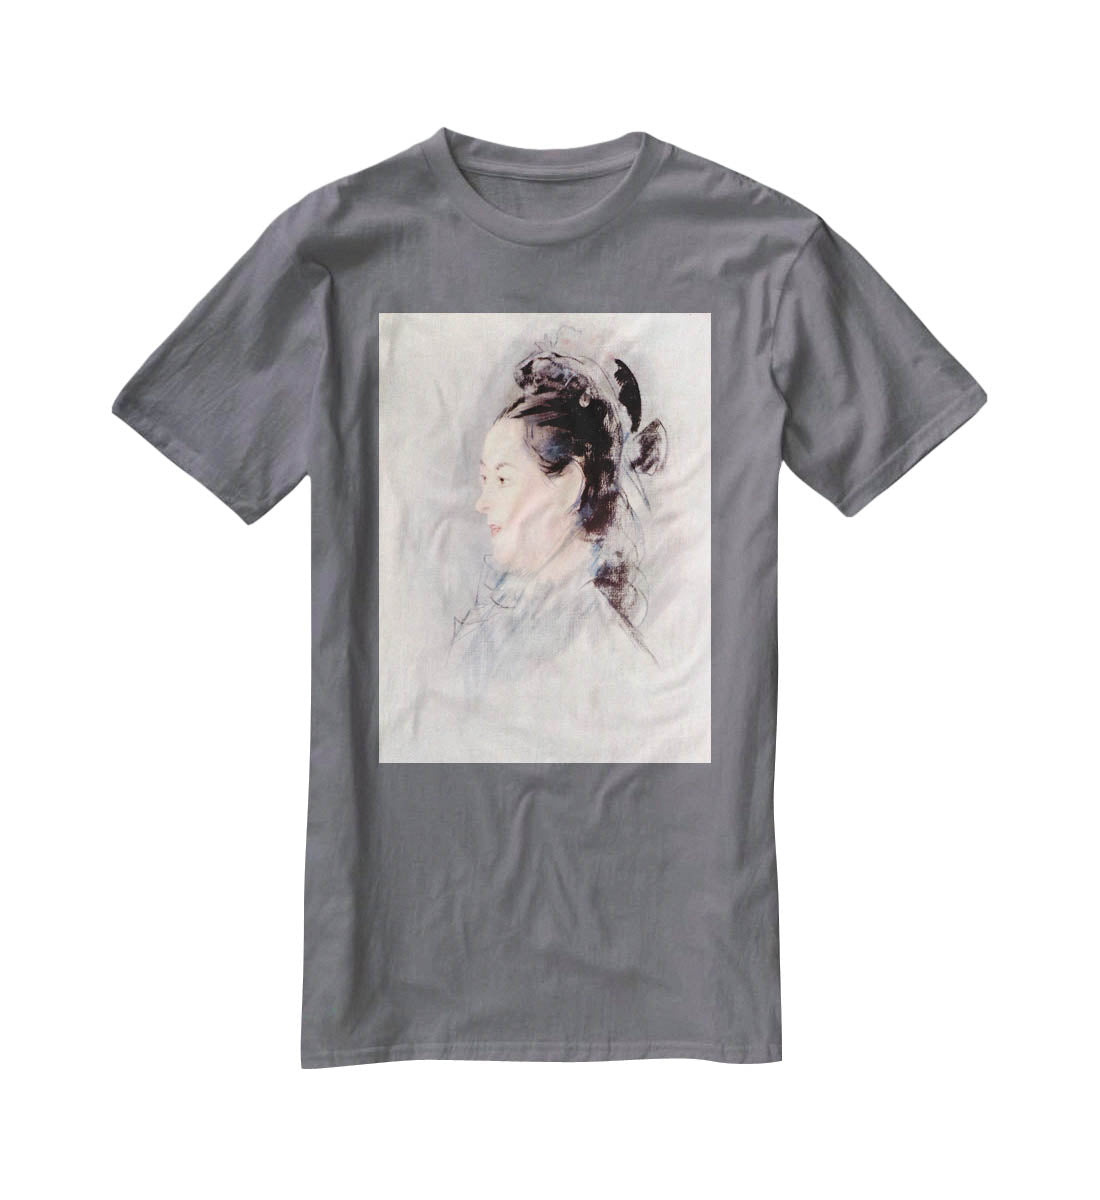 Lady with Hair Up by manet T-Shirt - Canvas Art Rocks - 3